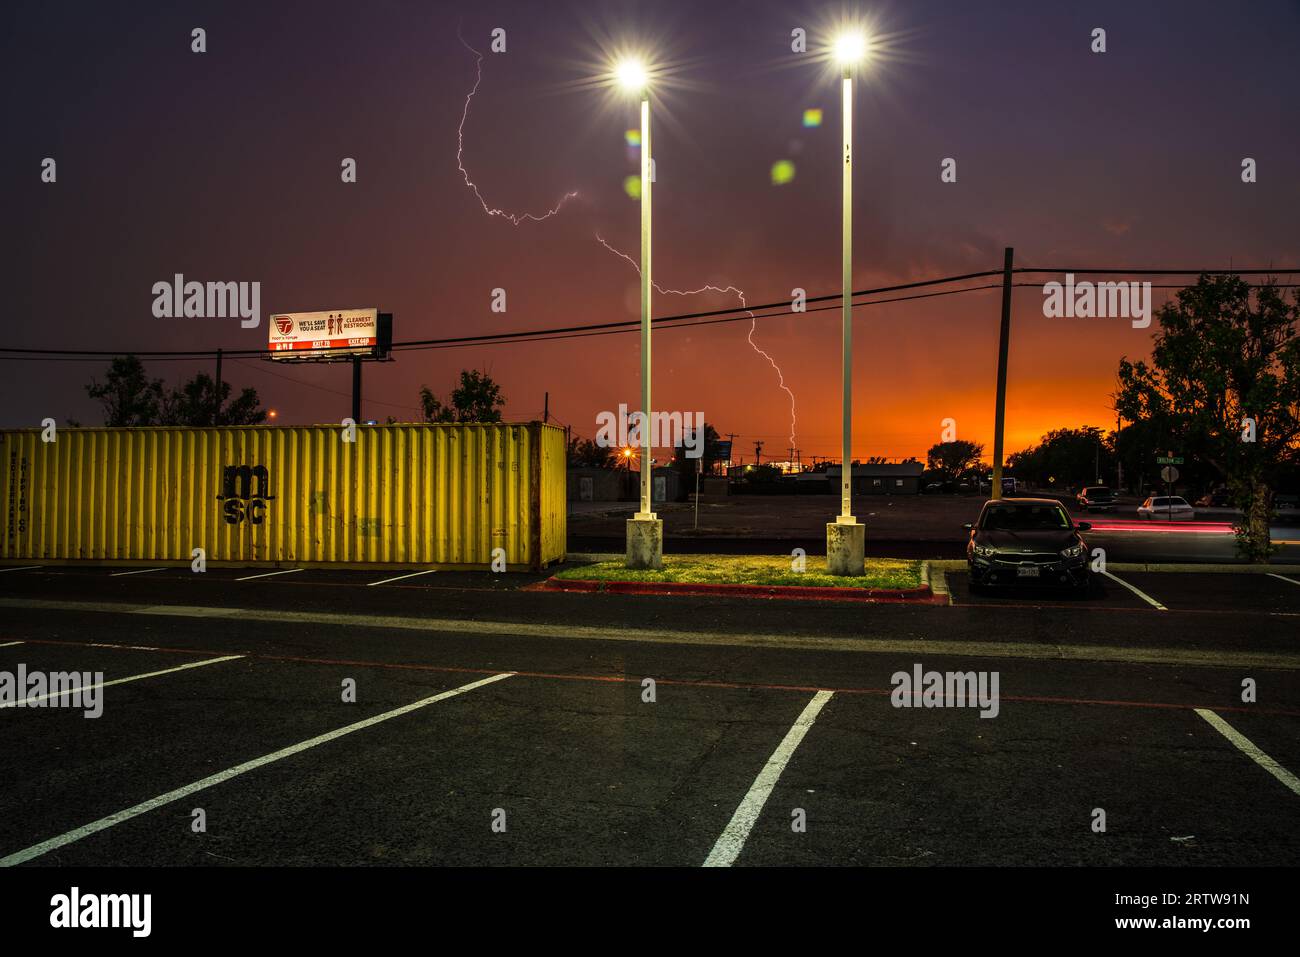 Lightning strikes at magic hour beyond a random parking lot with a bright yellow shipping container as day turns to night in Amarillo, Texas. Stock Photo